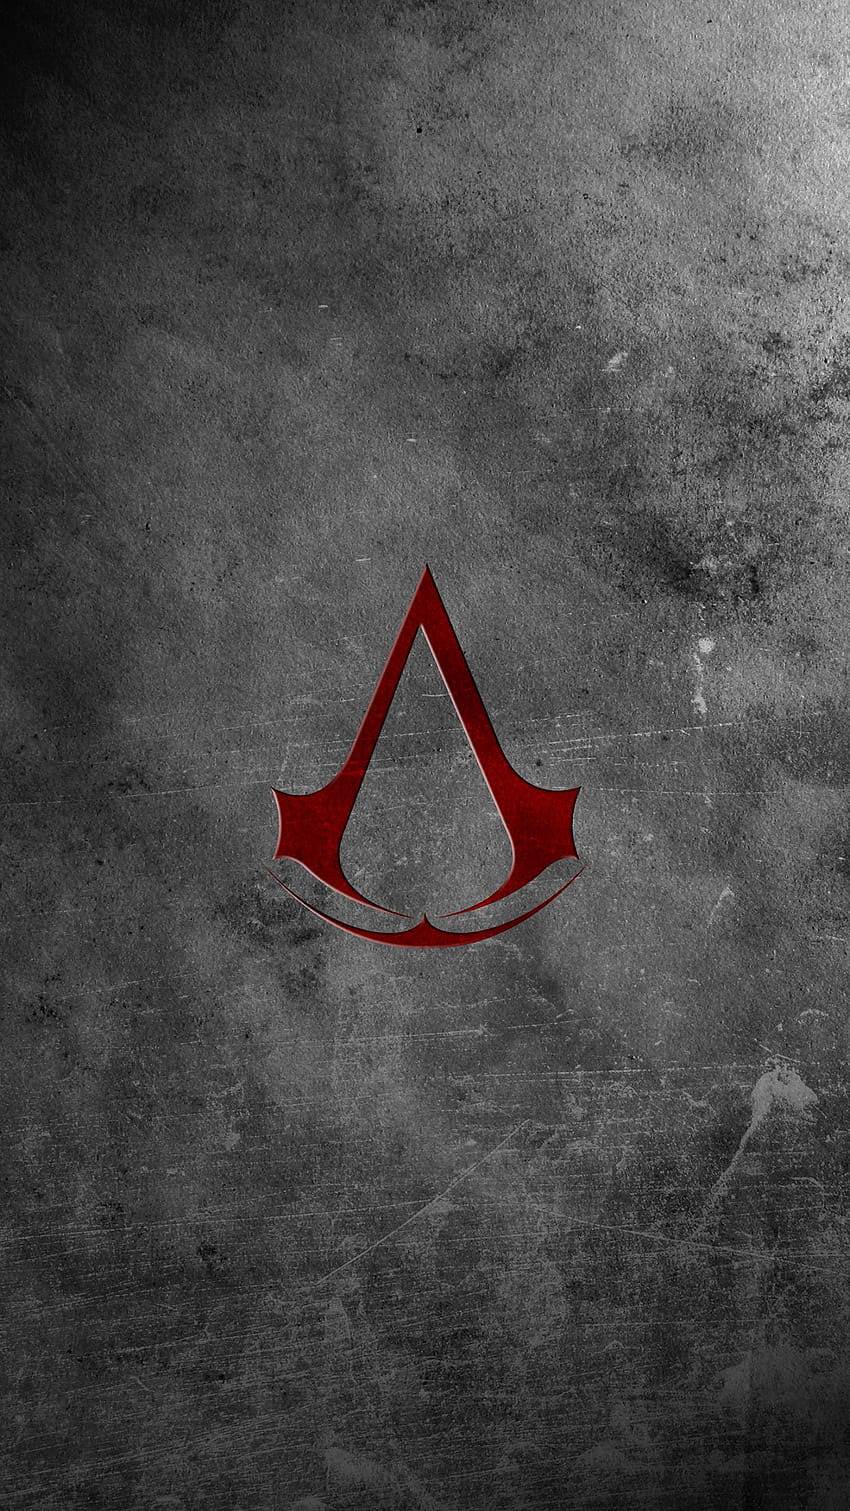 Best 3 Assassin's Creed iPhone Backgrounds on Hip, assassins creed logo mobile phone HD phone wallpaper